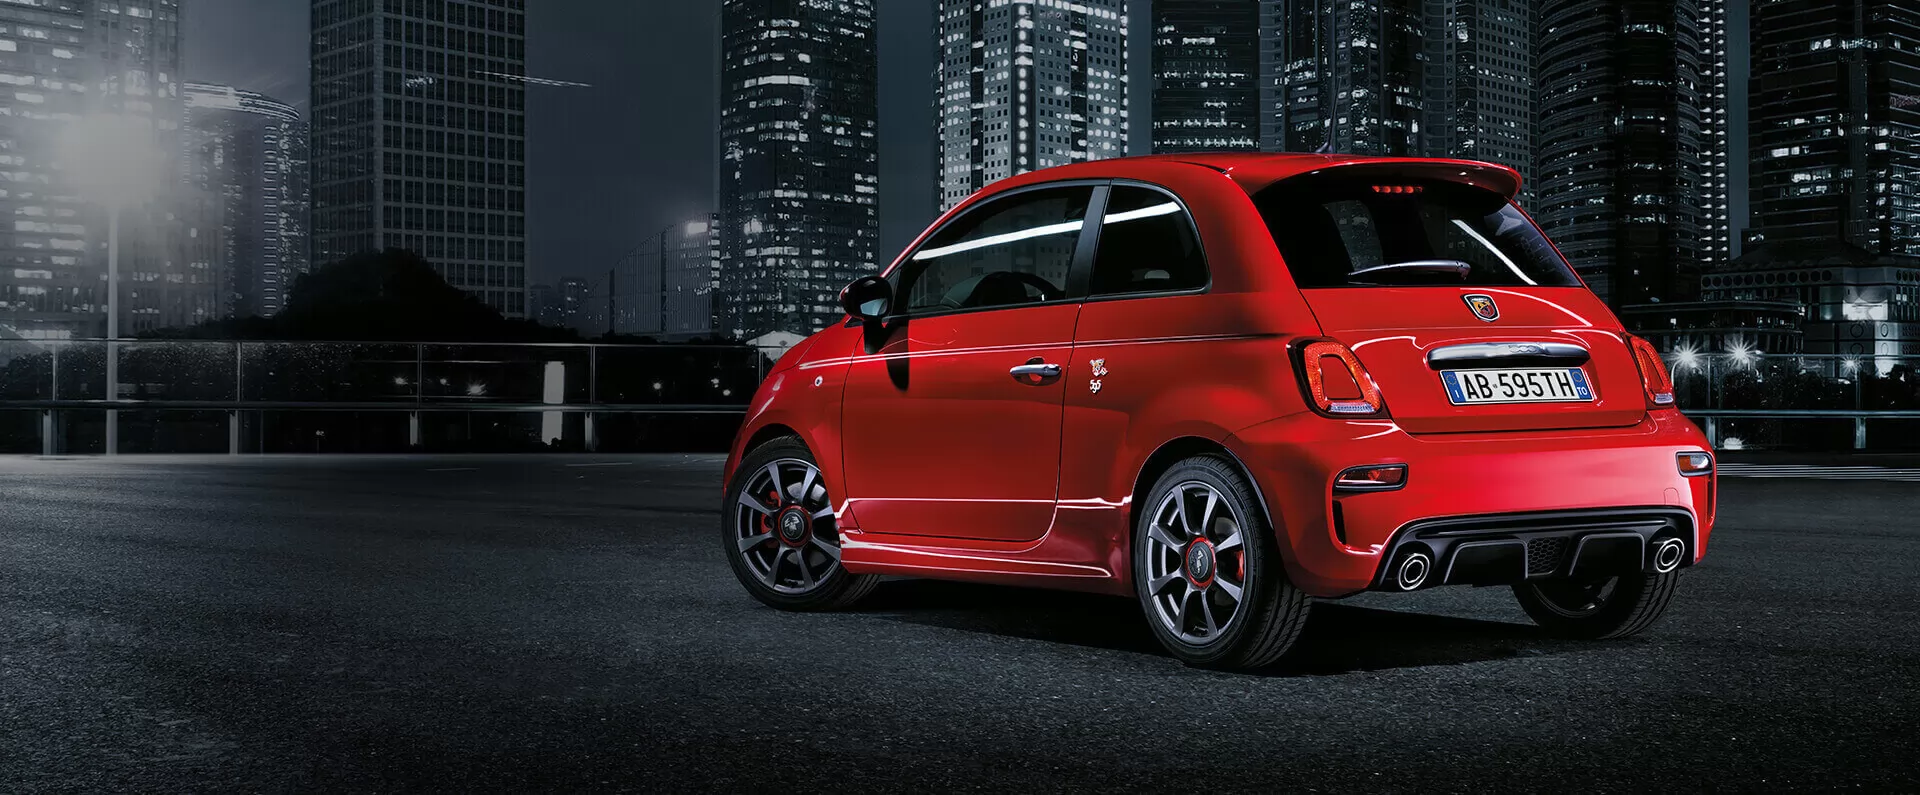 Lateral Abarth 595